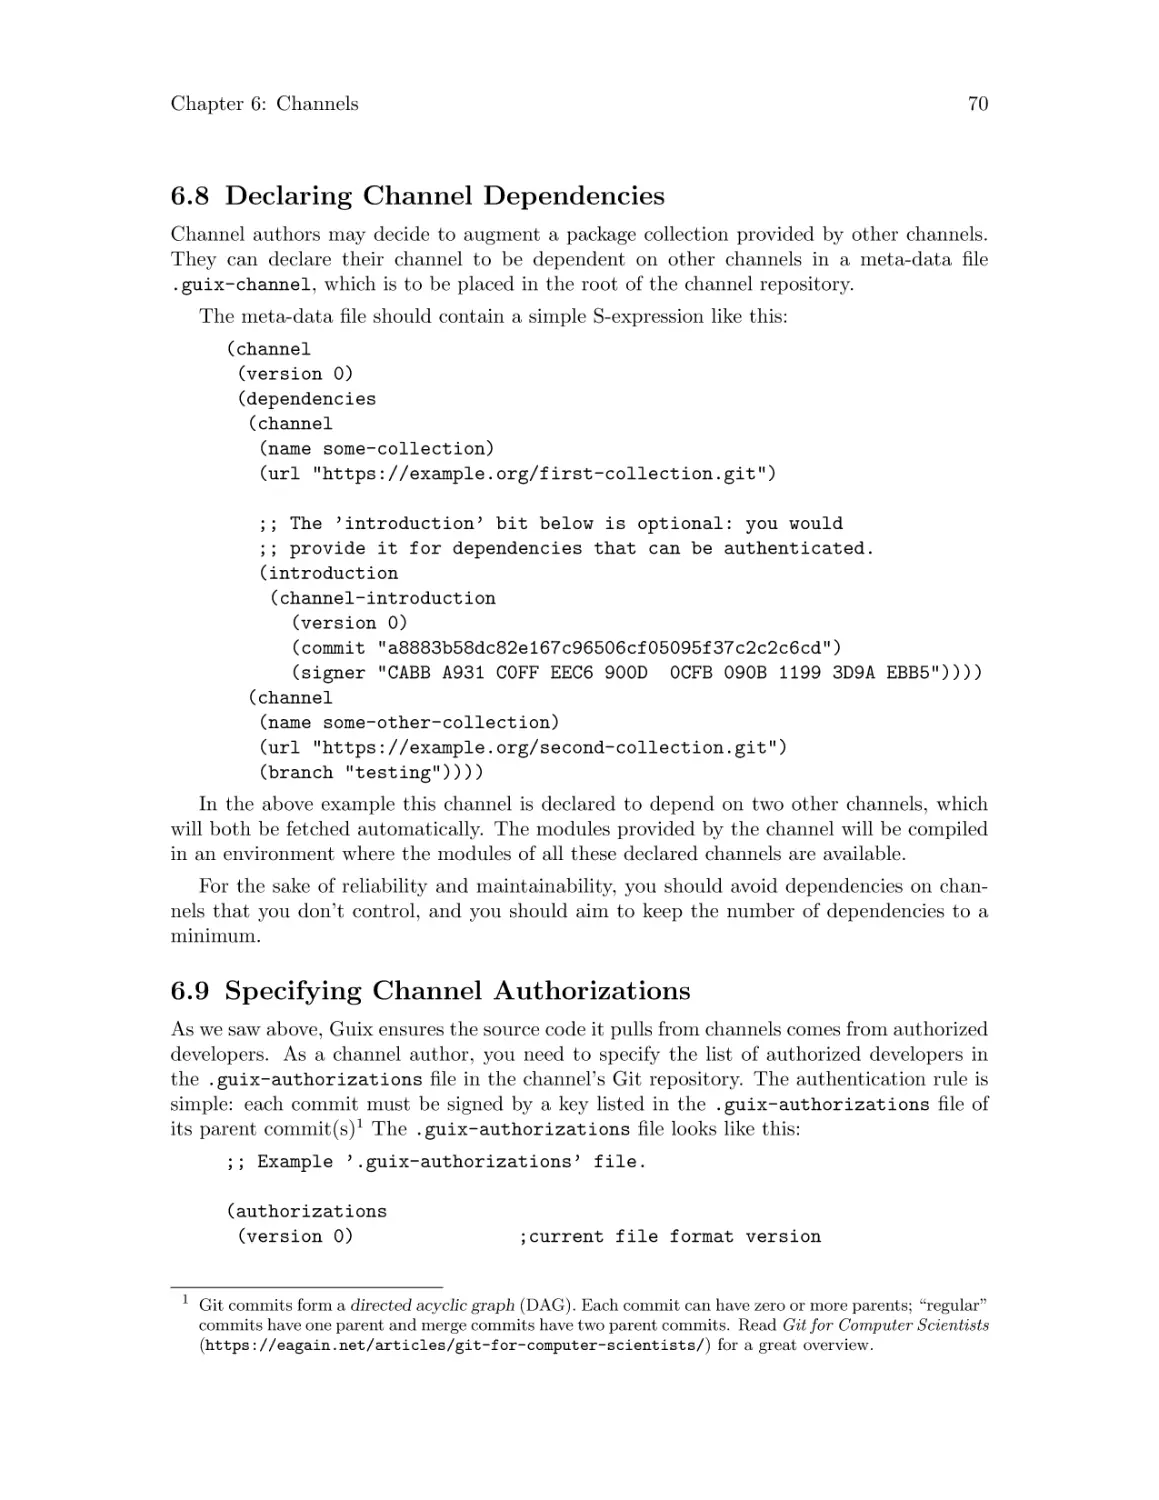 Declaring Channel Dependencies
Specifying Channel Authorizations